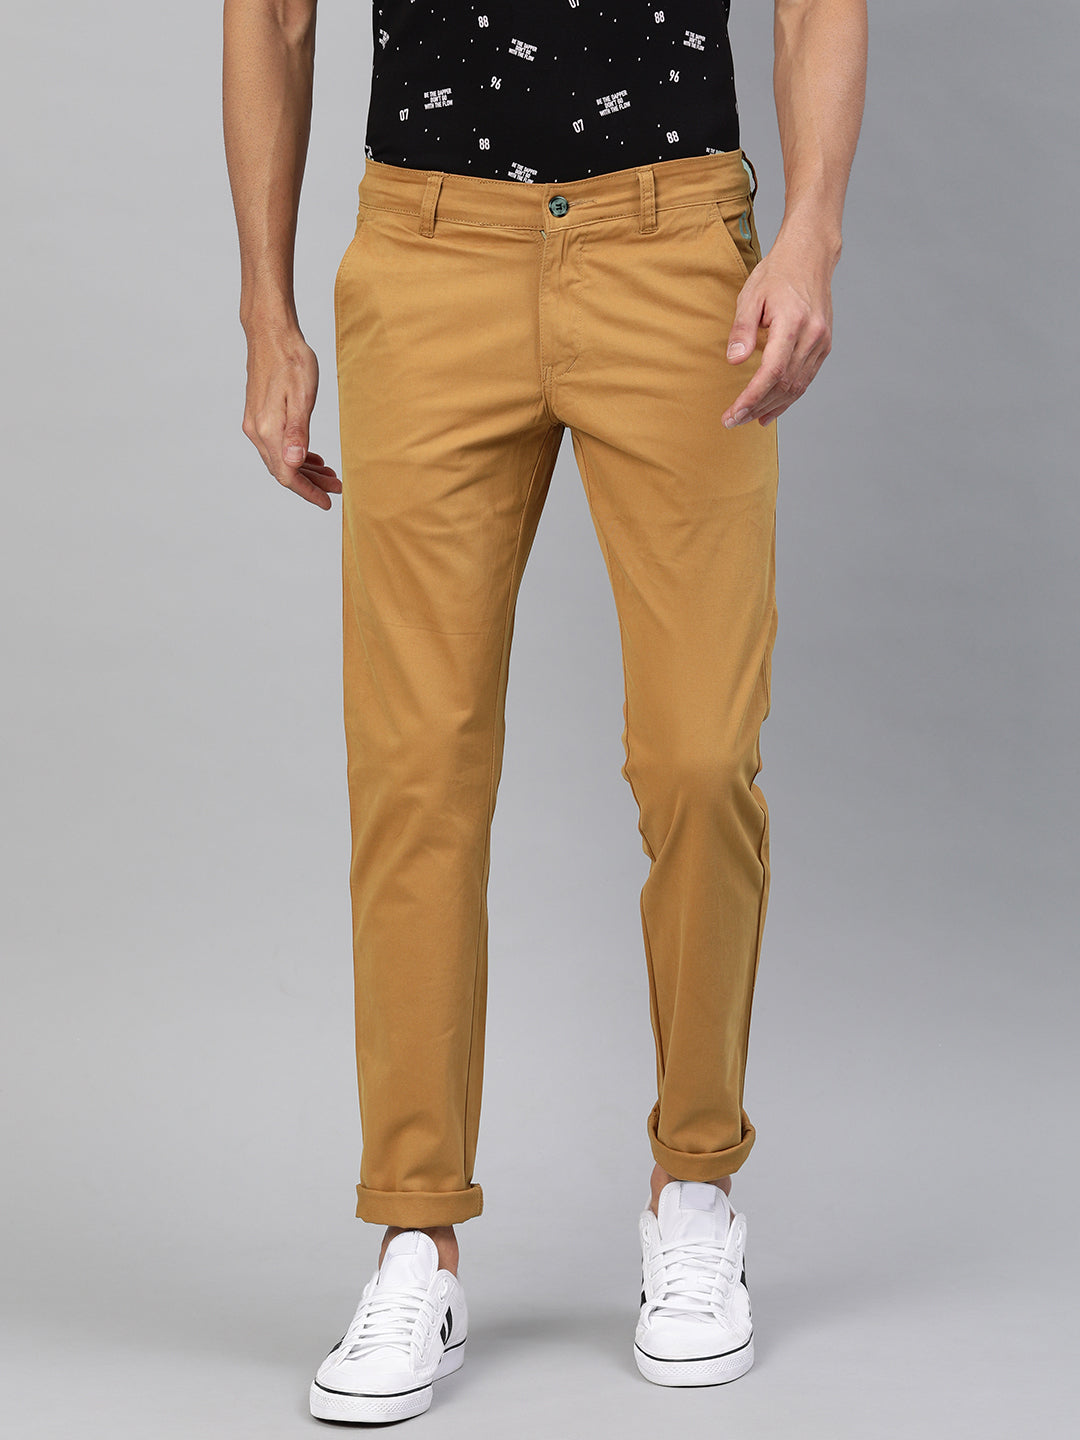 Men's Light Khaki Cotton Slim Fit Casual Chinos Trousers Stretch